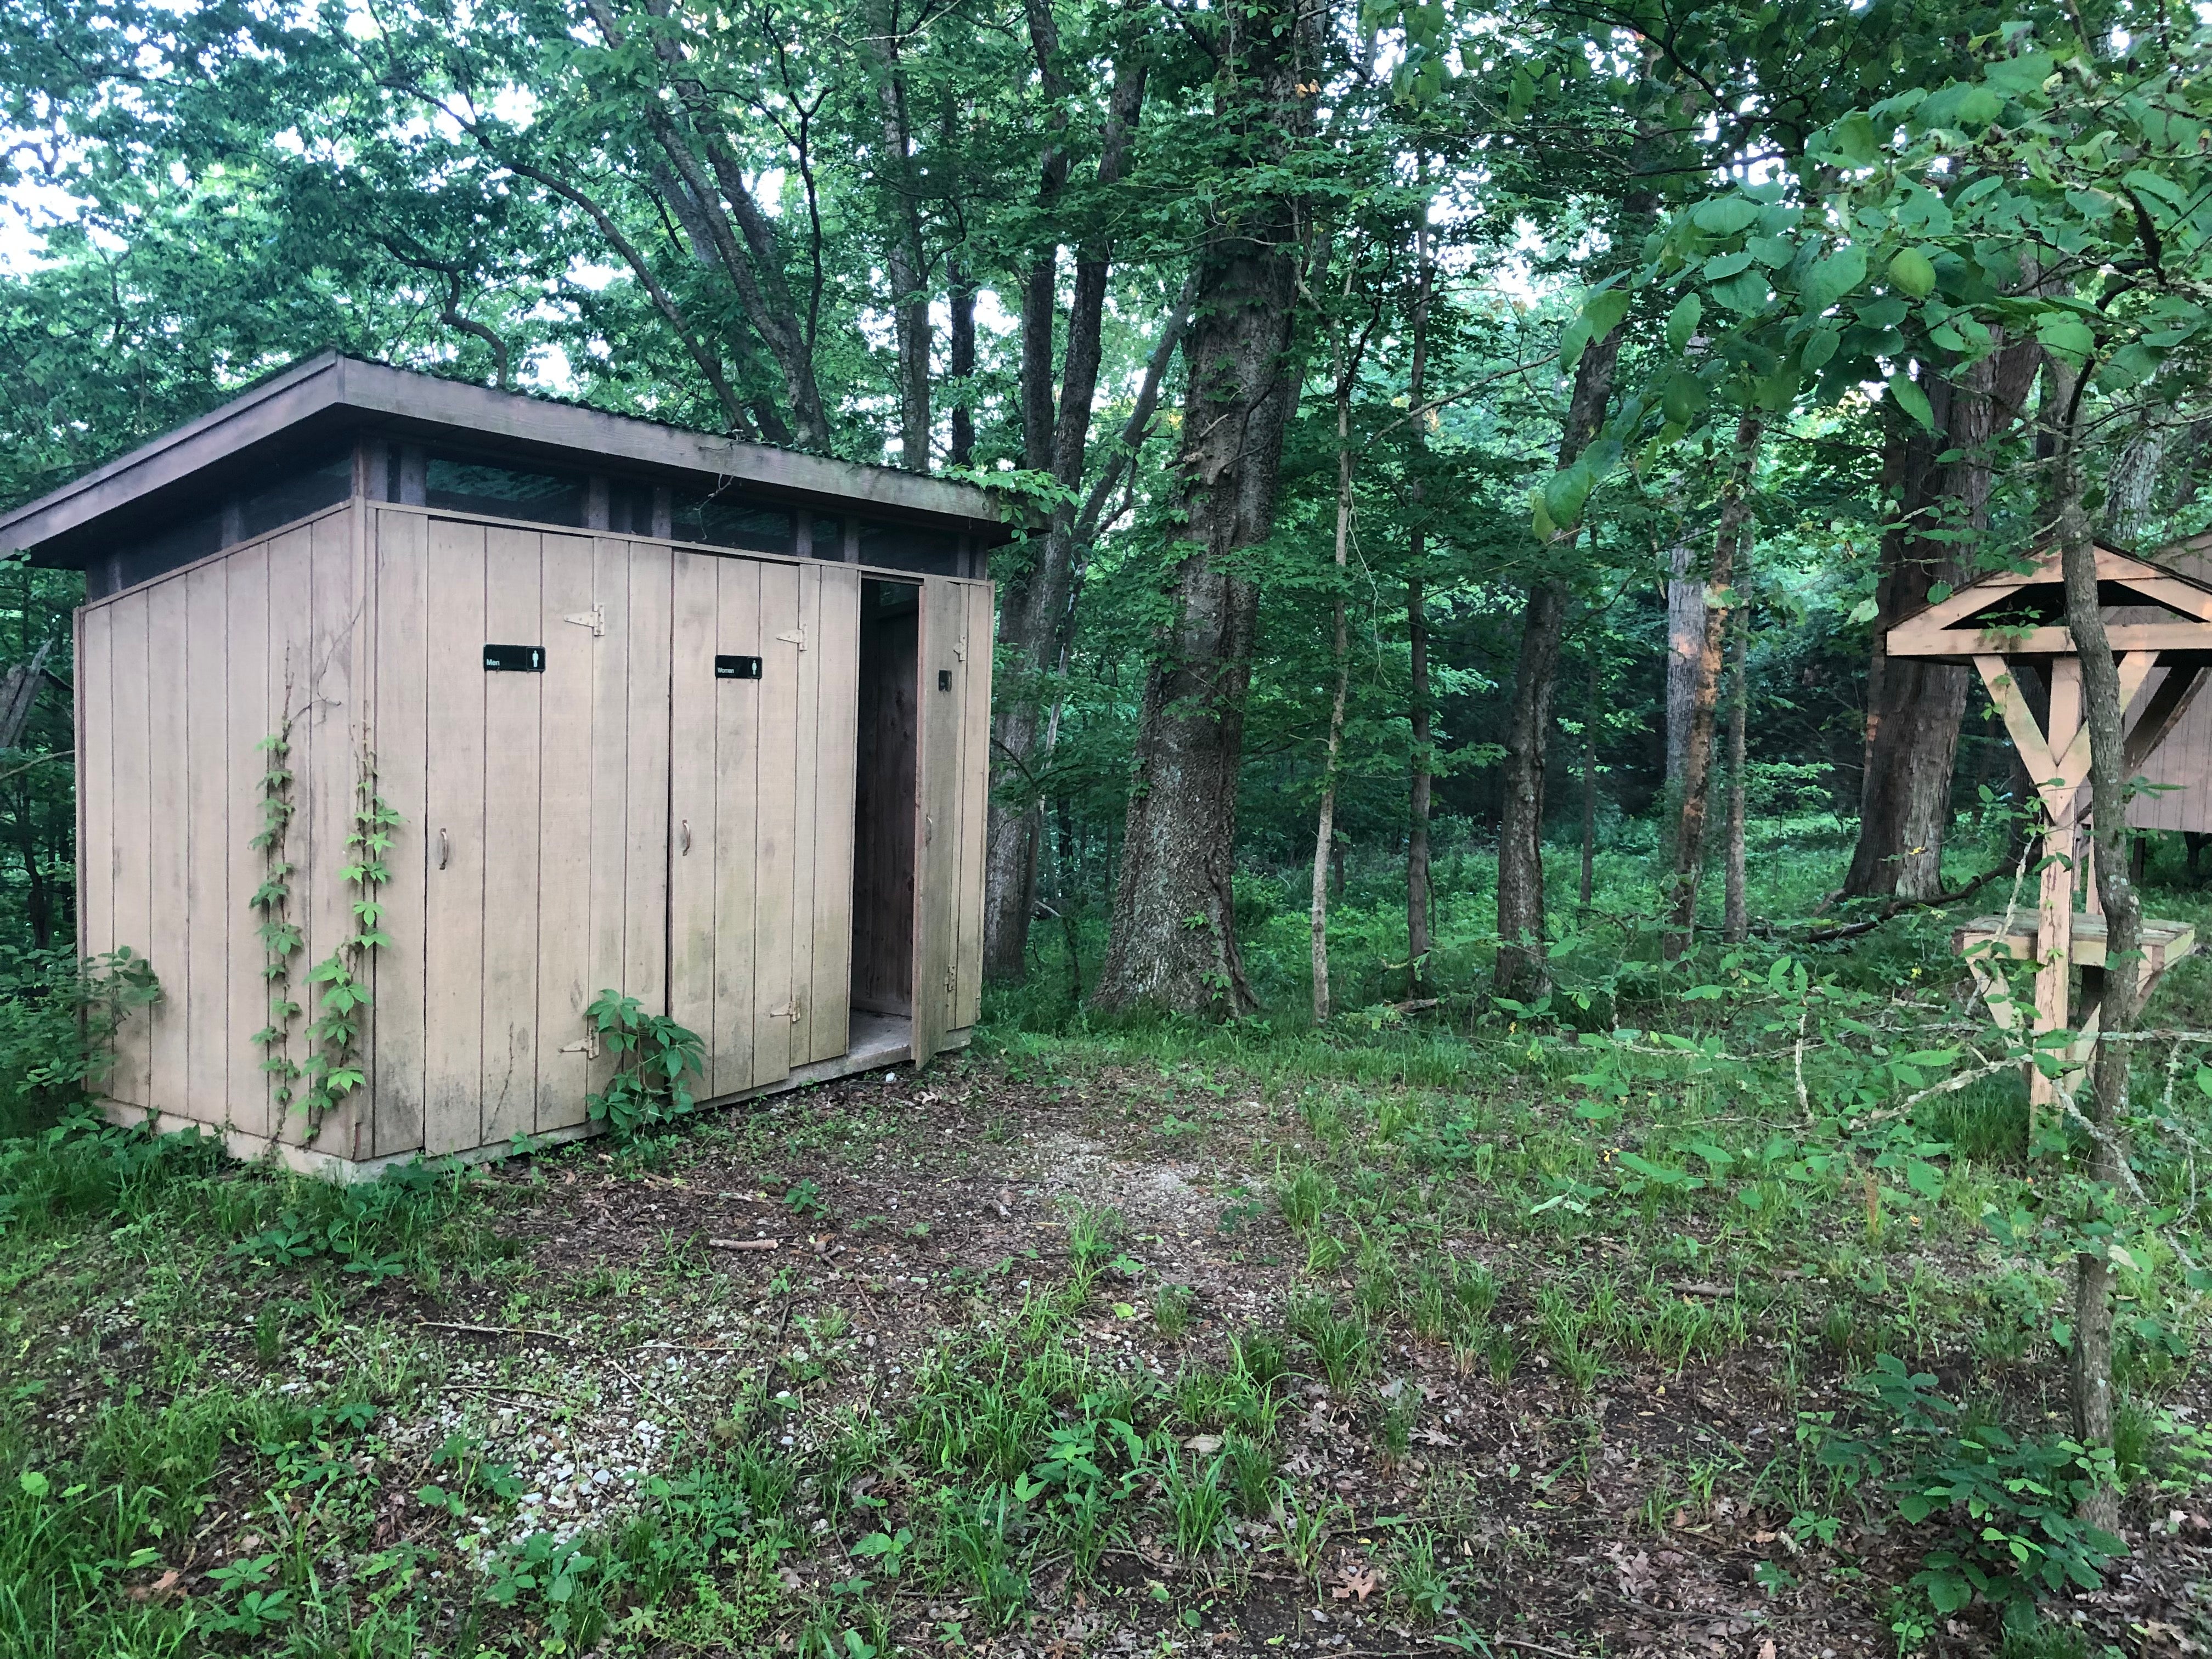 Two flushing toilets are available but there are outhouses placed around as well